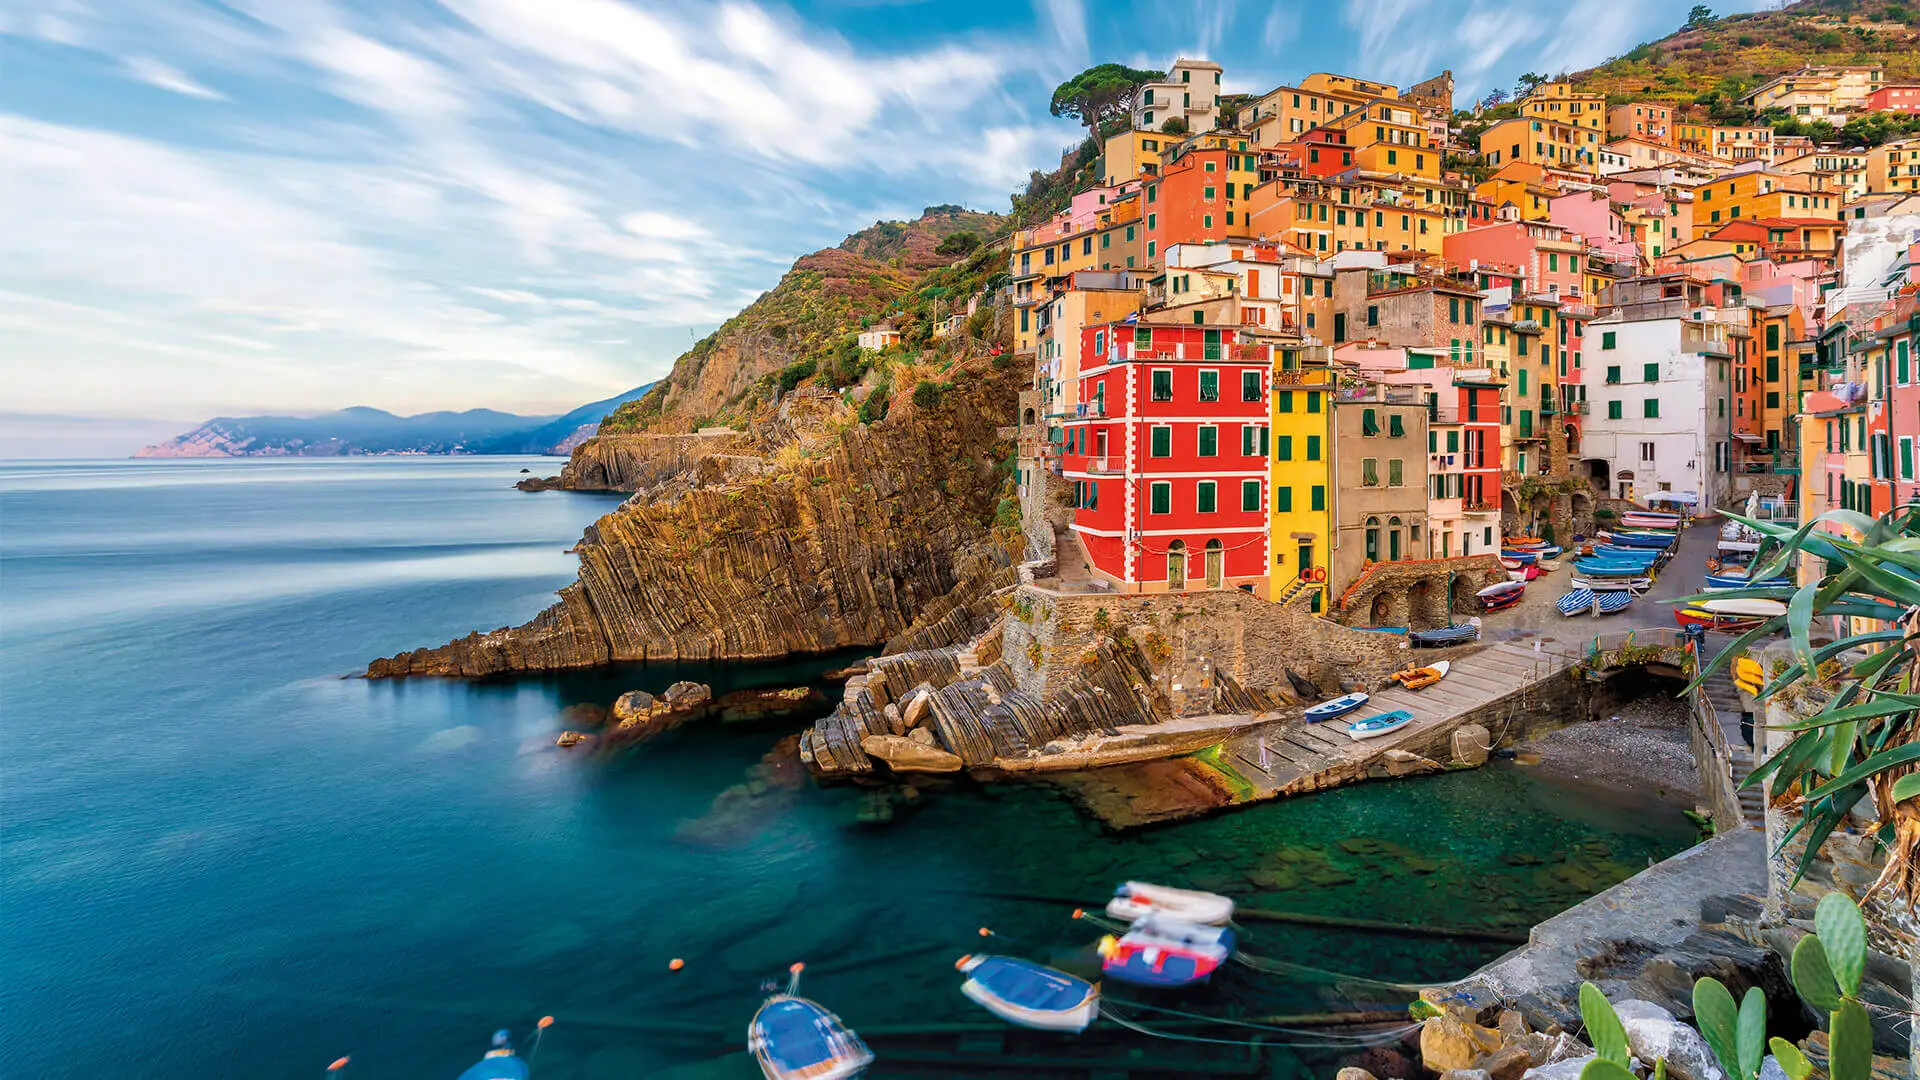 What to do in Cinque Terre